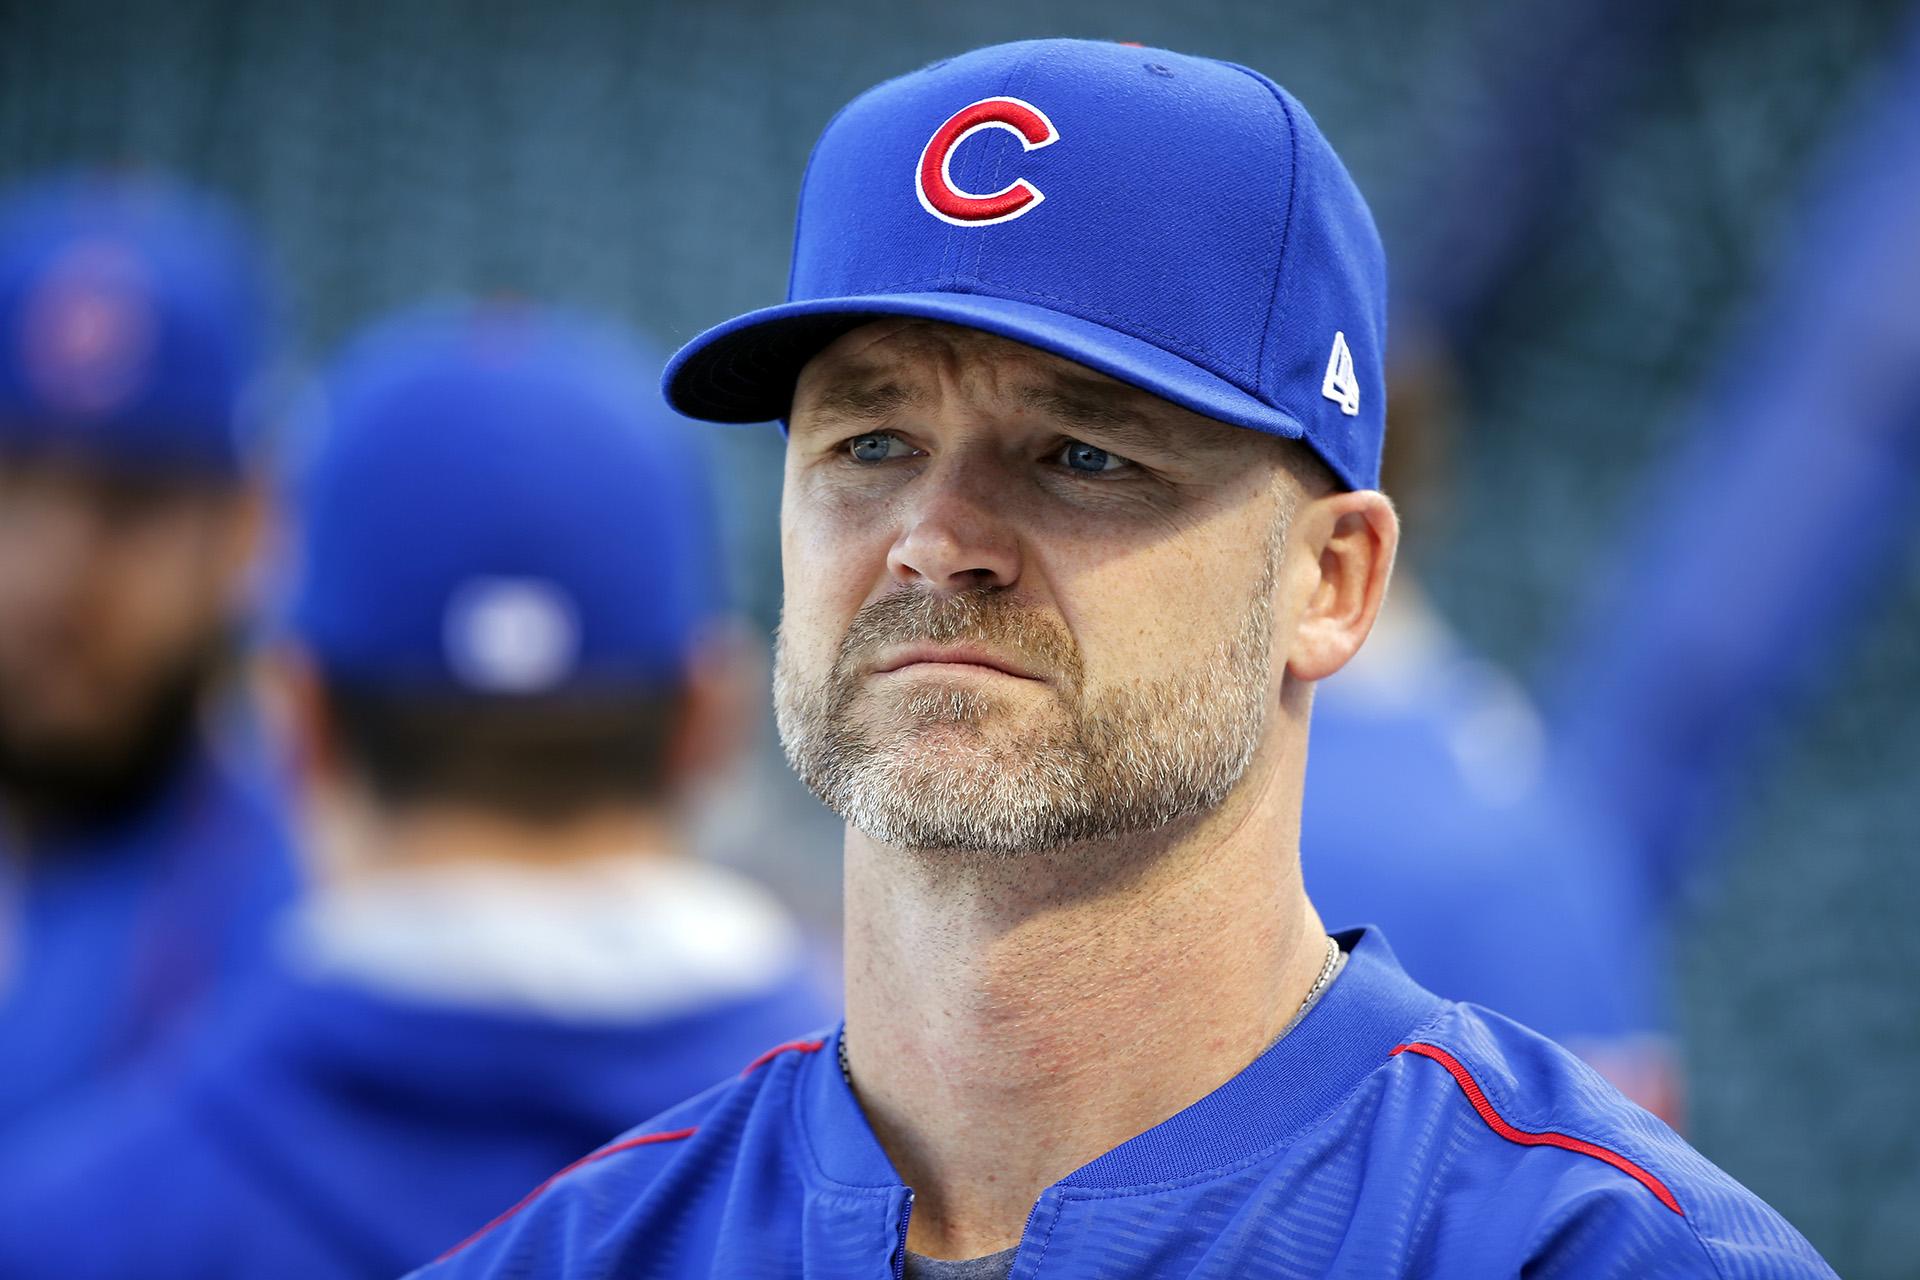 In this Oct. 14, 2016, file photo, Chicago Cubs’ David Ross waits for his turn during batting practice before baseball’s National League Championship Series against the Los Angeles Dodgers in Chicago. (AP Photo / Charles Rex Arbogast, File)